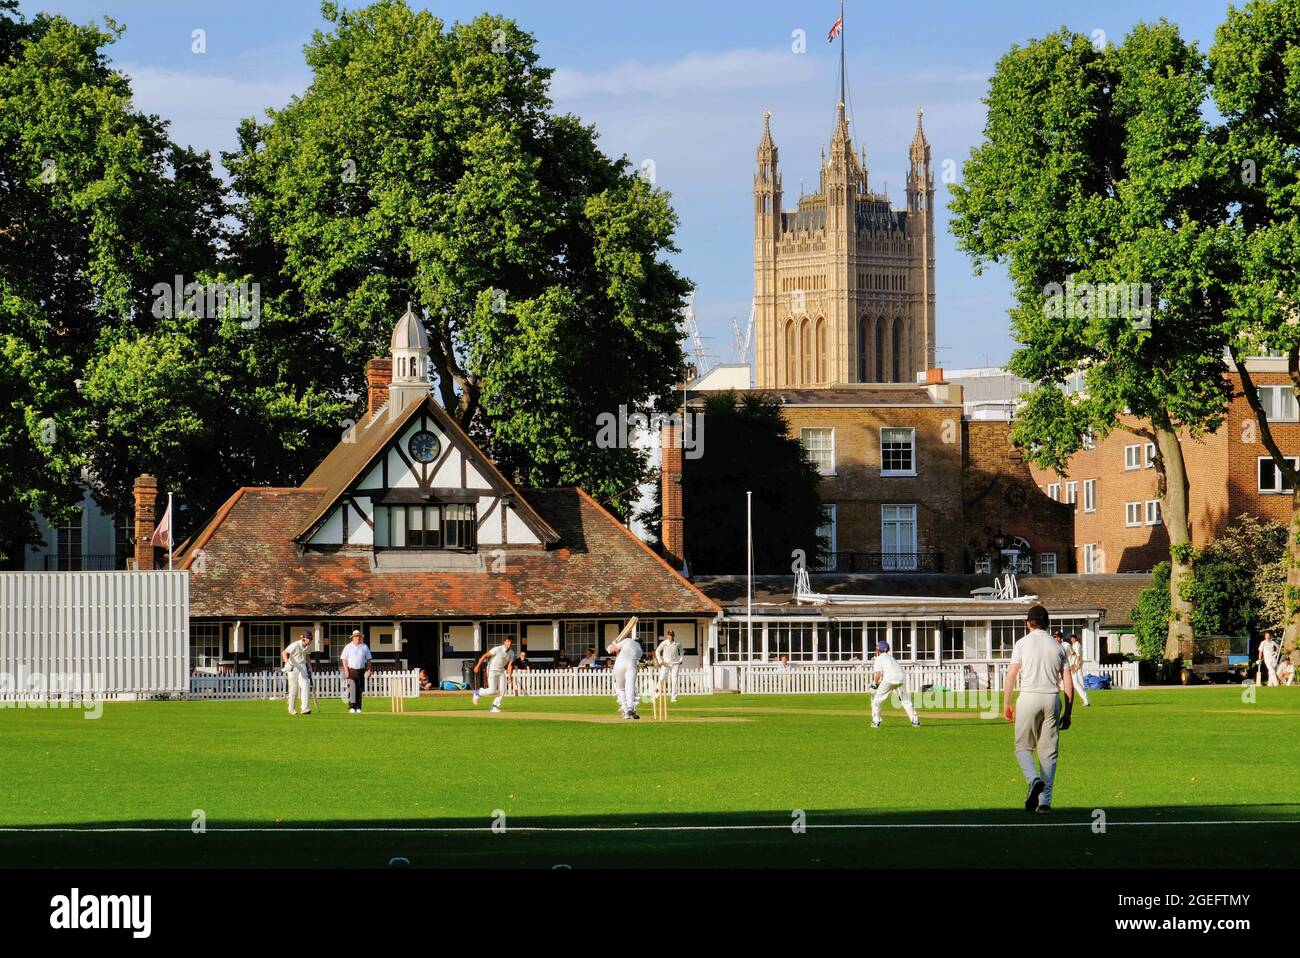 Clean Bowled! Cricket game at Vincent Square with pavilion and Houses of Parliament, soon before sunset in Westminster, London, England Stock Photo